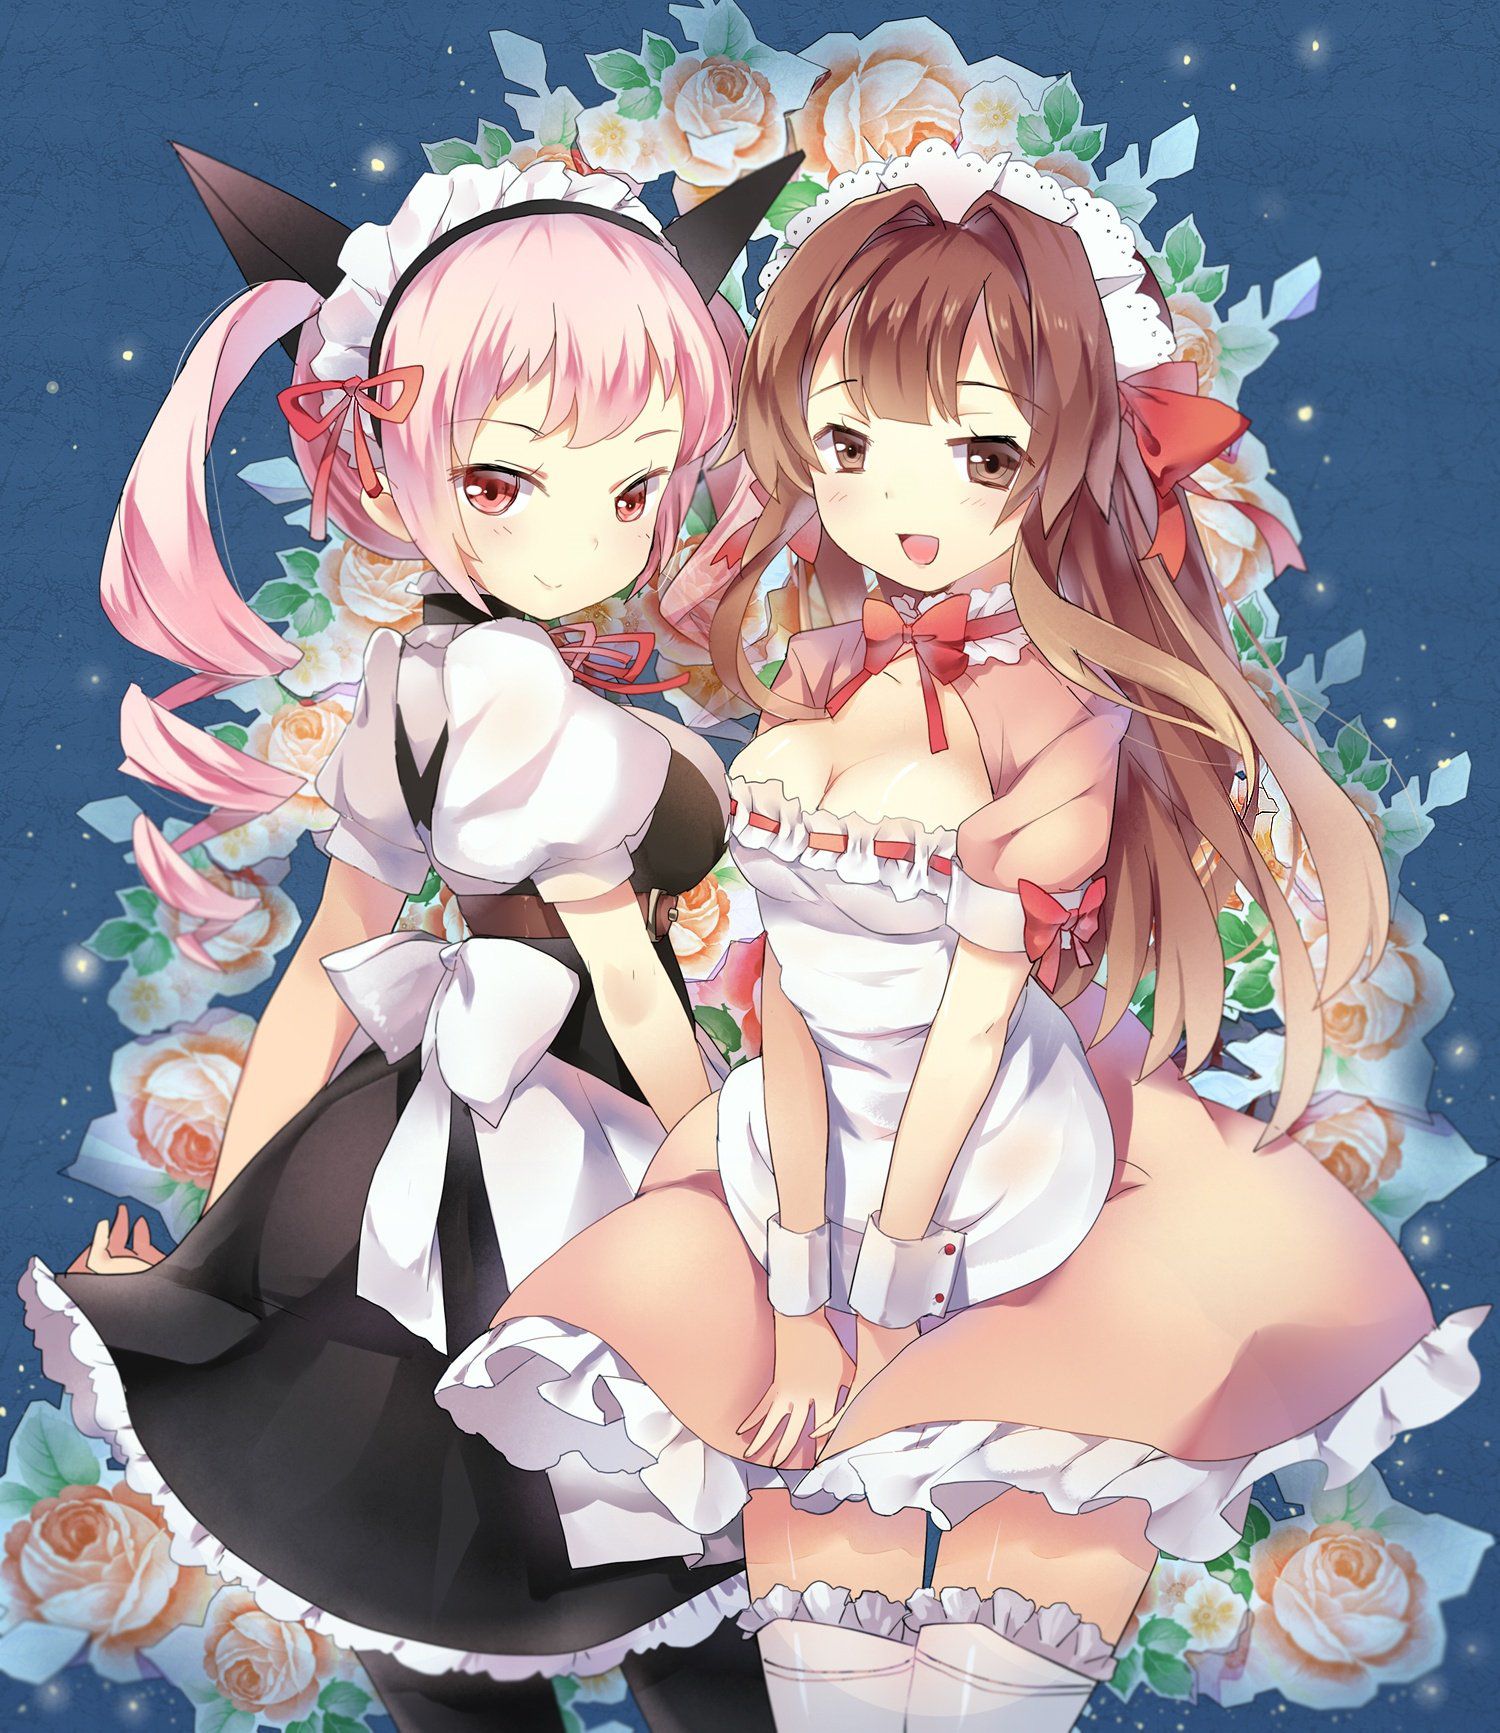 I collected erotic images of maids 13